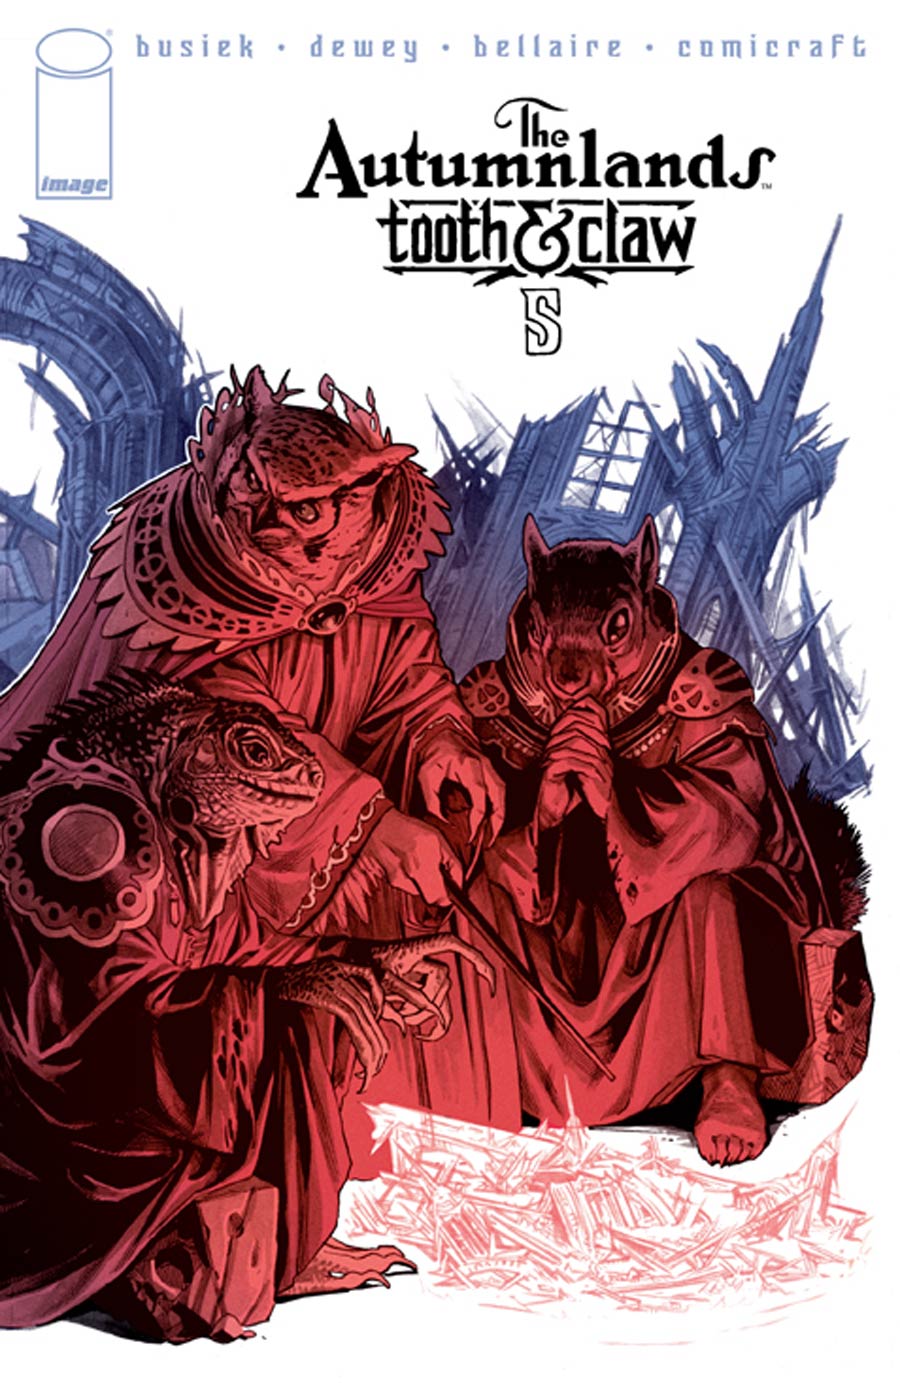 Autumnlands Tooth & Claw #5 Cover A Ben Dewey